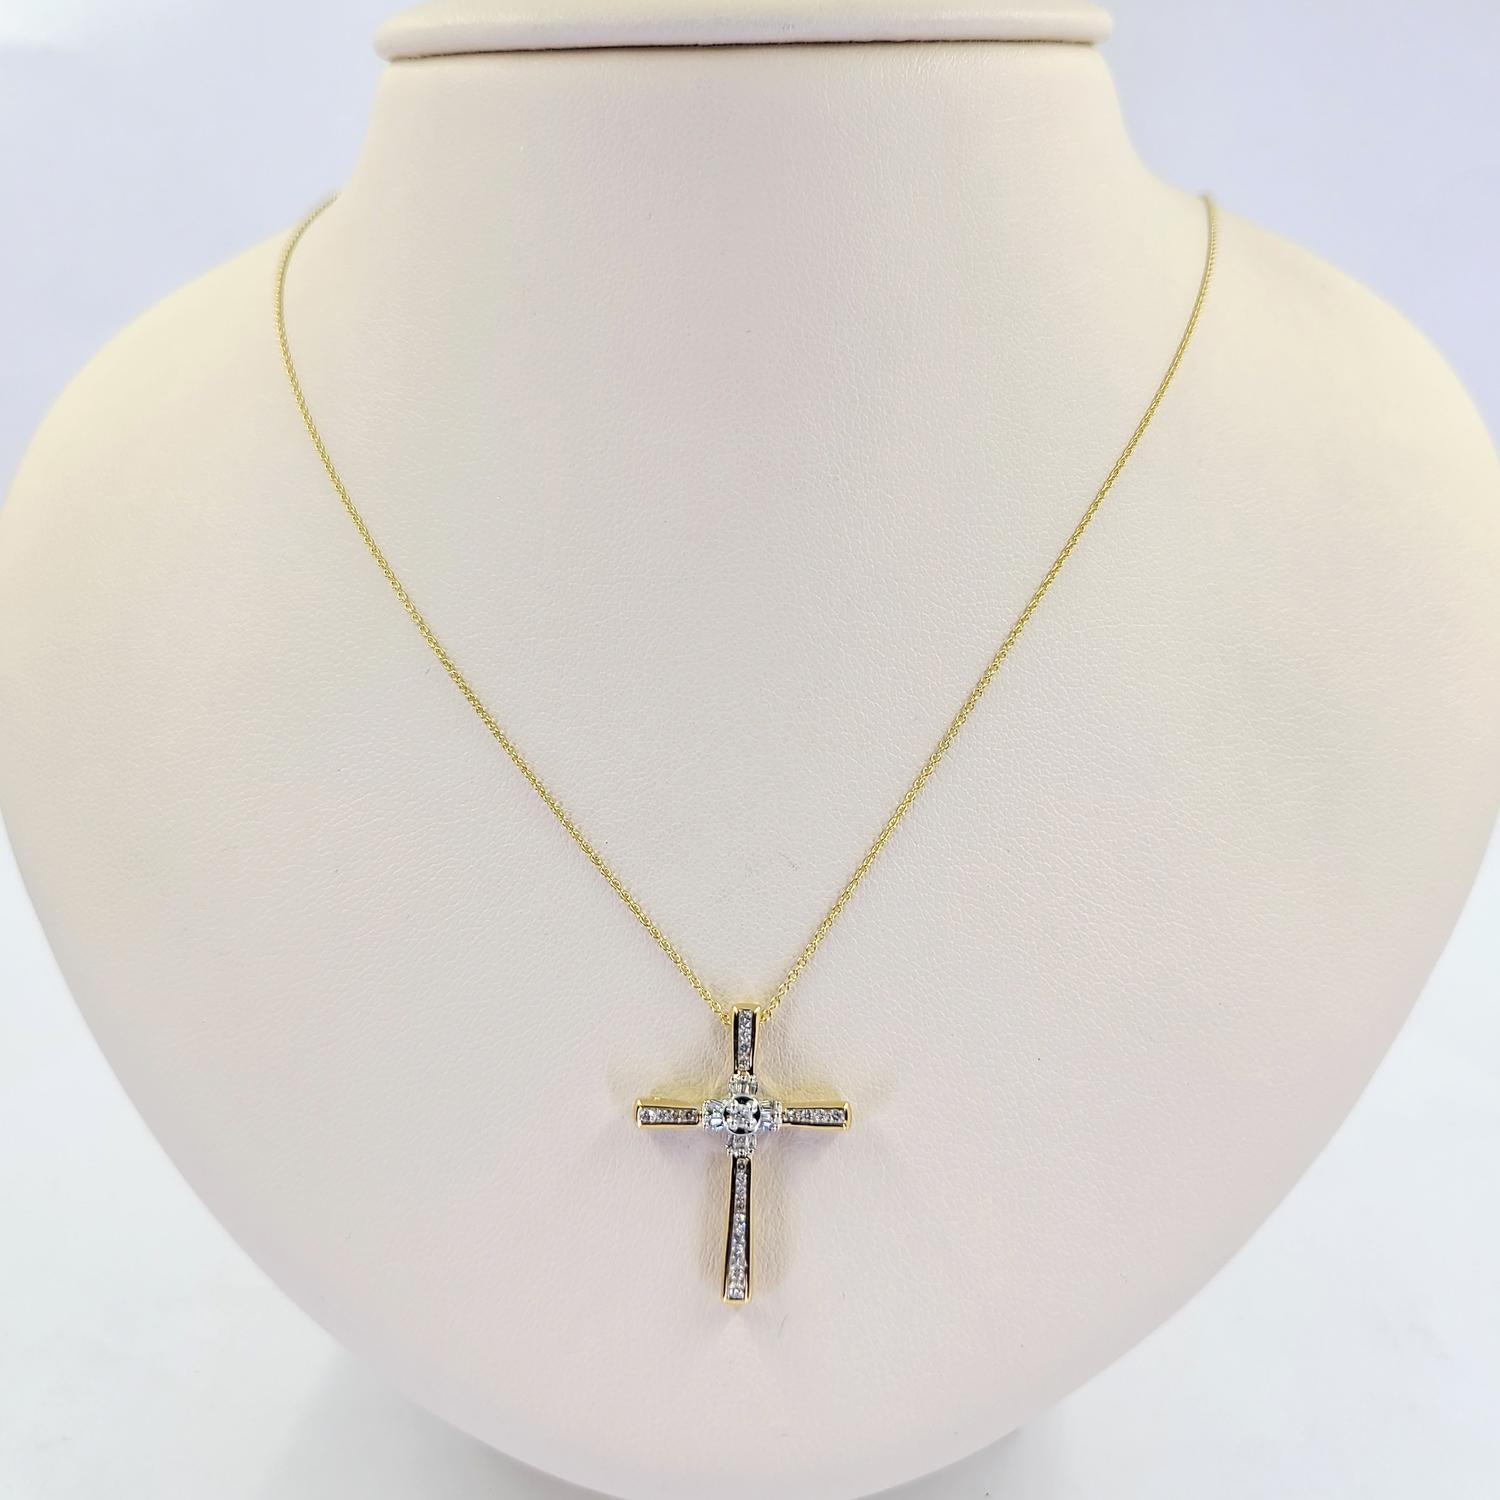 14 Karat Yellow Gold Cross Pendant Necklace Featuring 24 Round Brilliant and Baguette Cut Diamonds of SI Clarity and H/I Color Totaling Approximately 0.12 Carats. 16 Inch Rolo Chain with 1 Inch Pendant. Finished Weight Is 2.1 Grams.